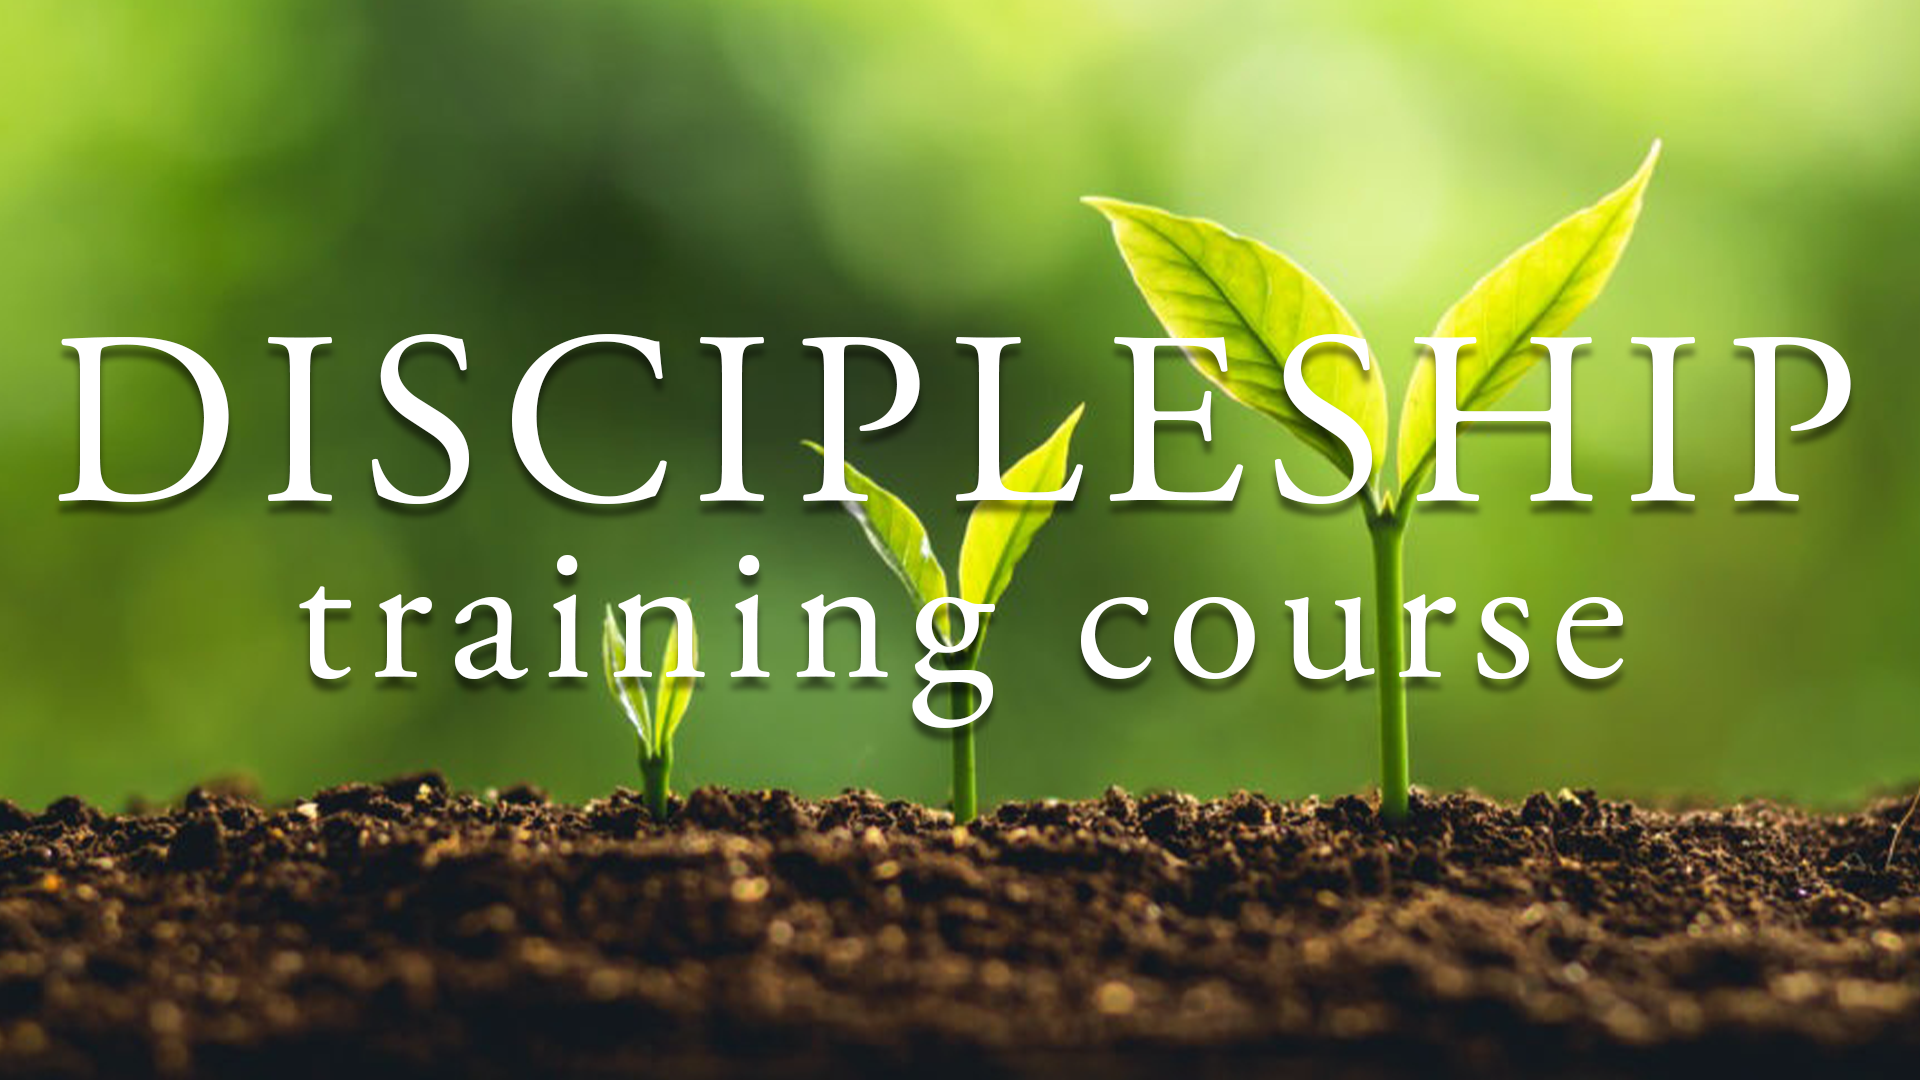 Discipleship Traing Course